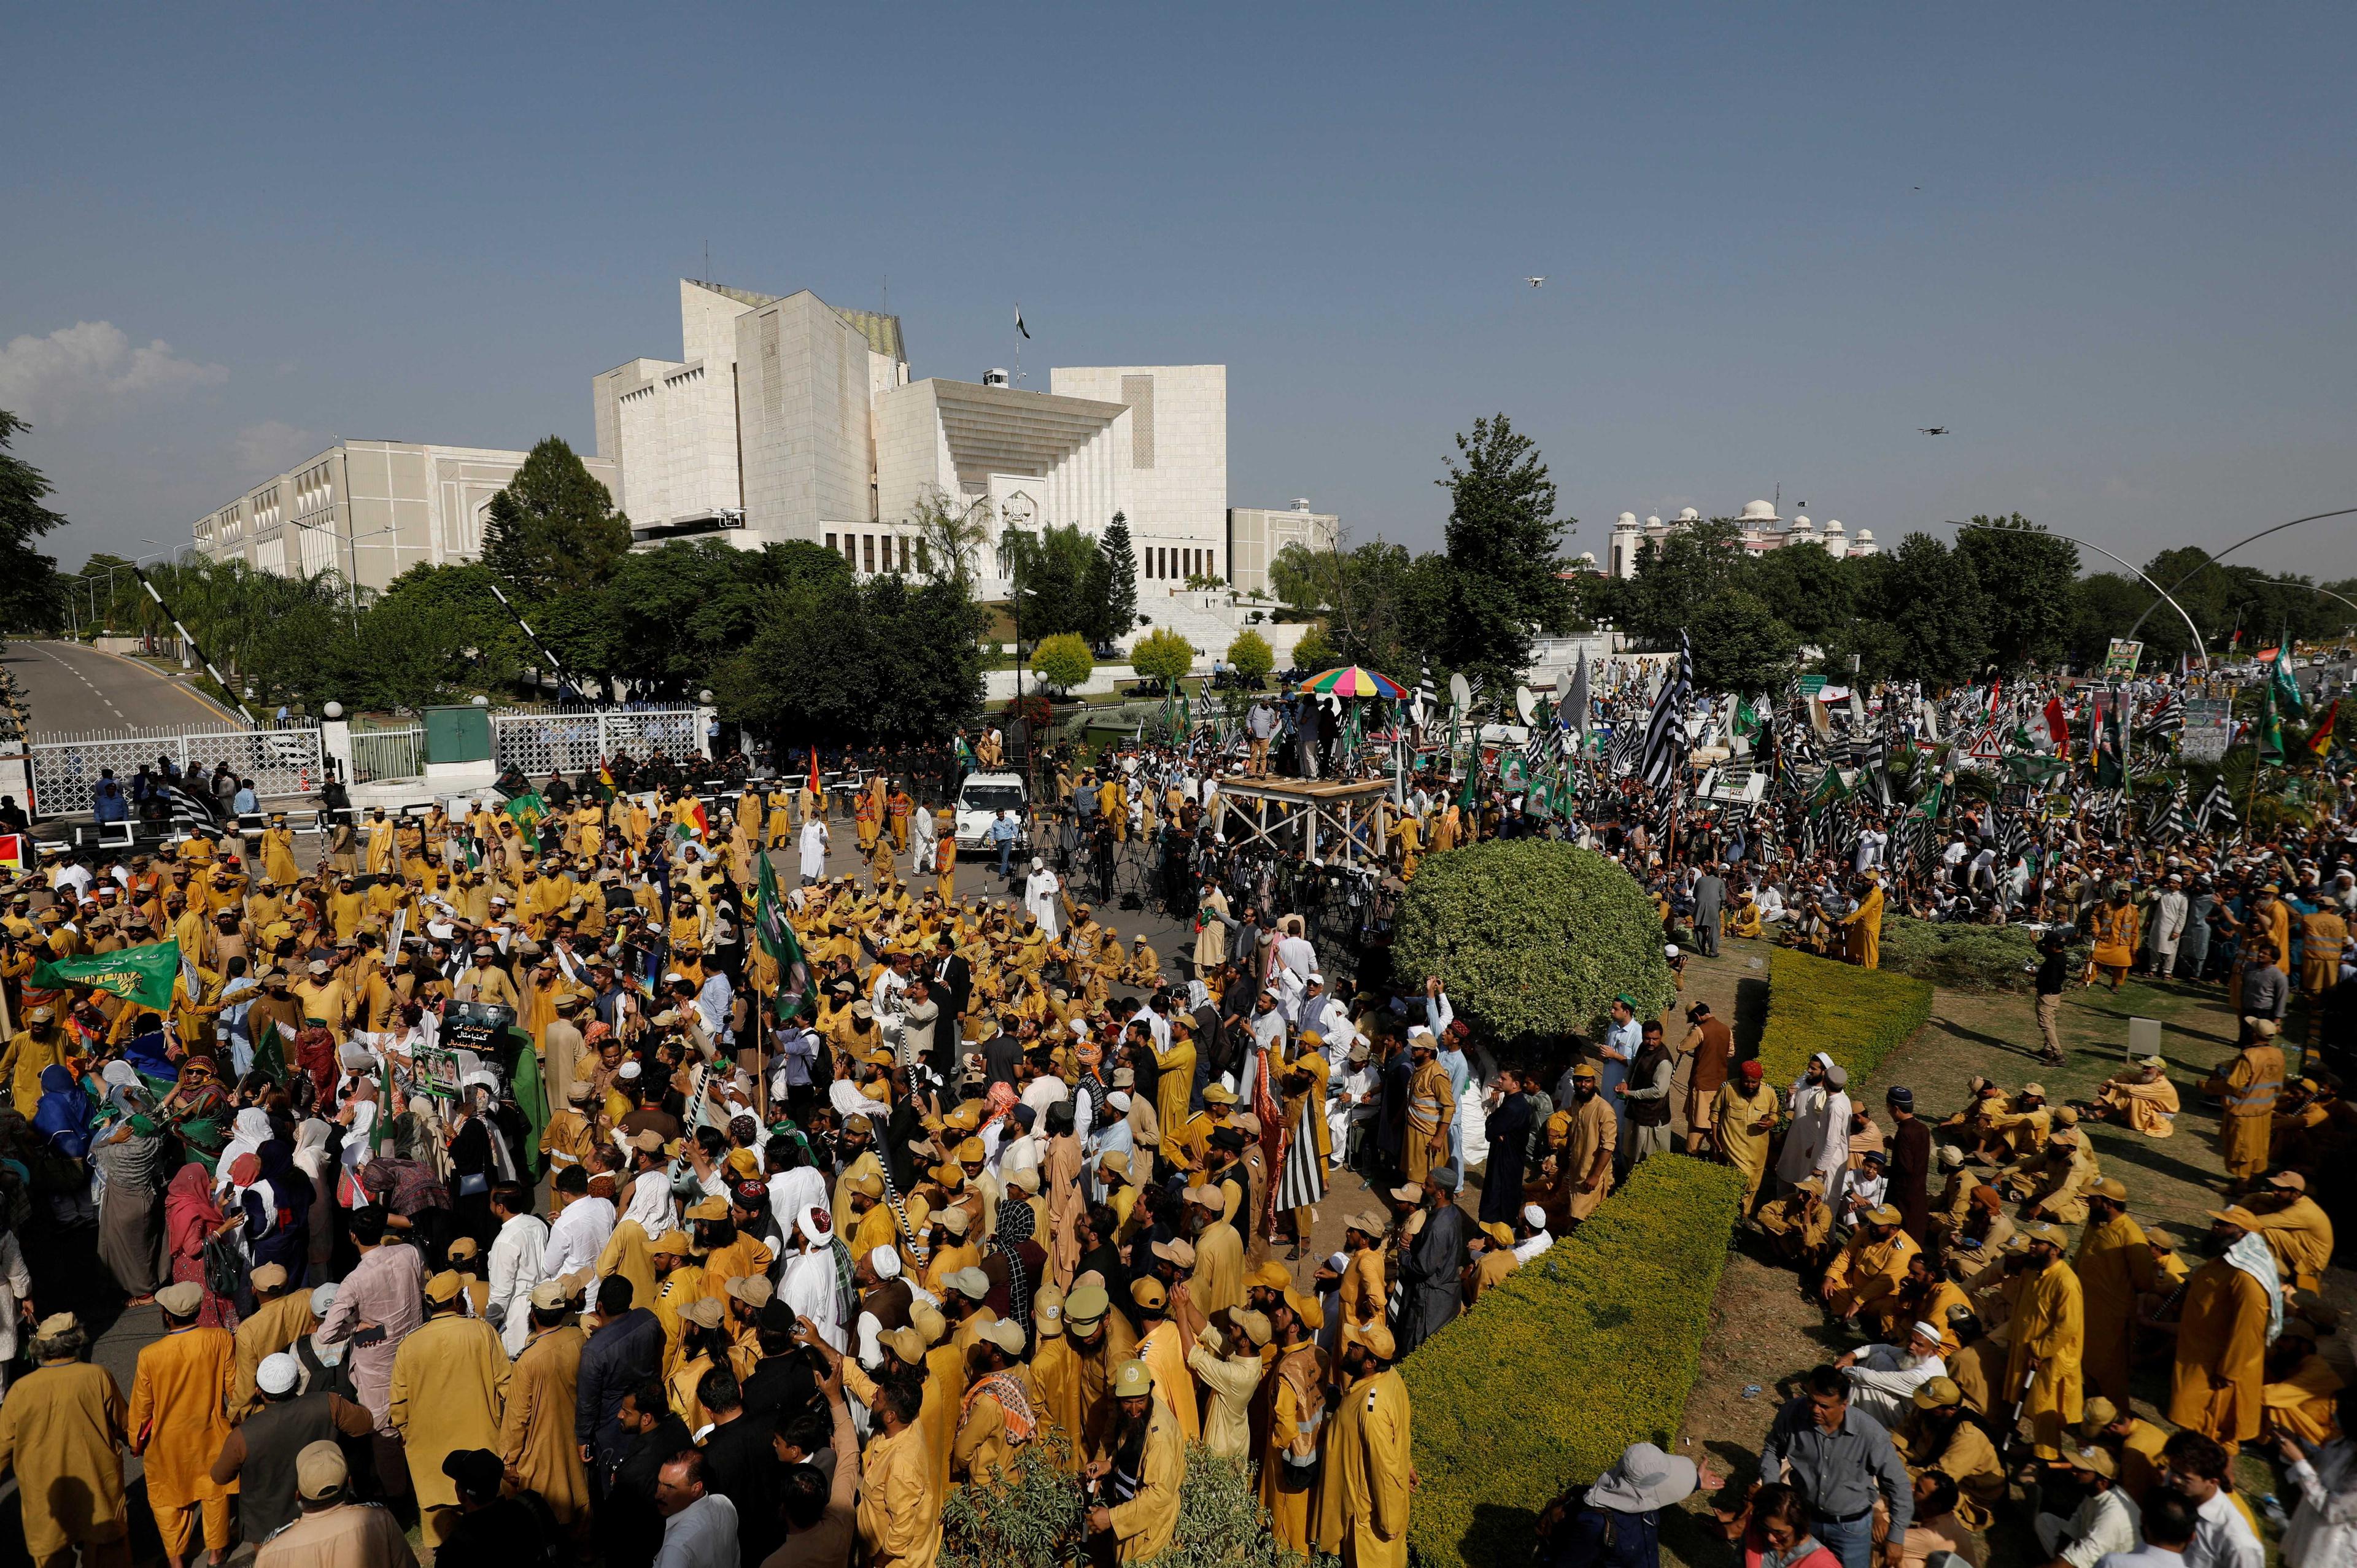 Supporters of Pakistan Democratic Movement gather in front of the Supreme Court of Pakistan to protest against the granting of bail in several cases to Pakistan's former Prime Minister Imran Khan, in Islamabad, Pakistan May 15. Photo: Reuters